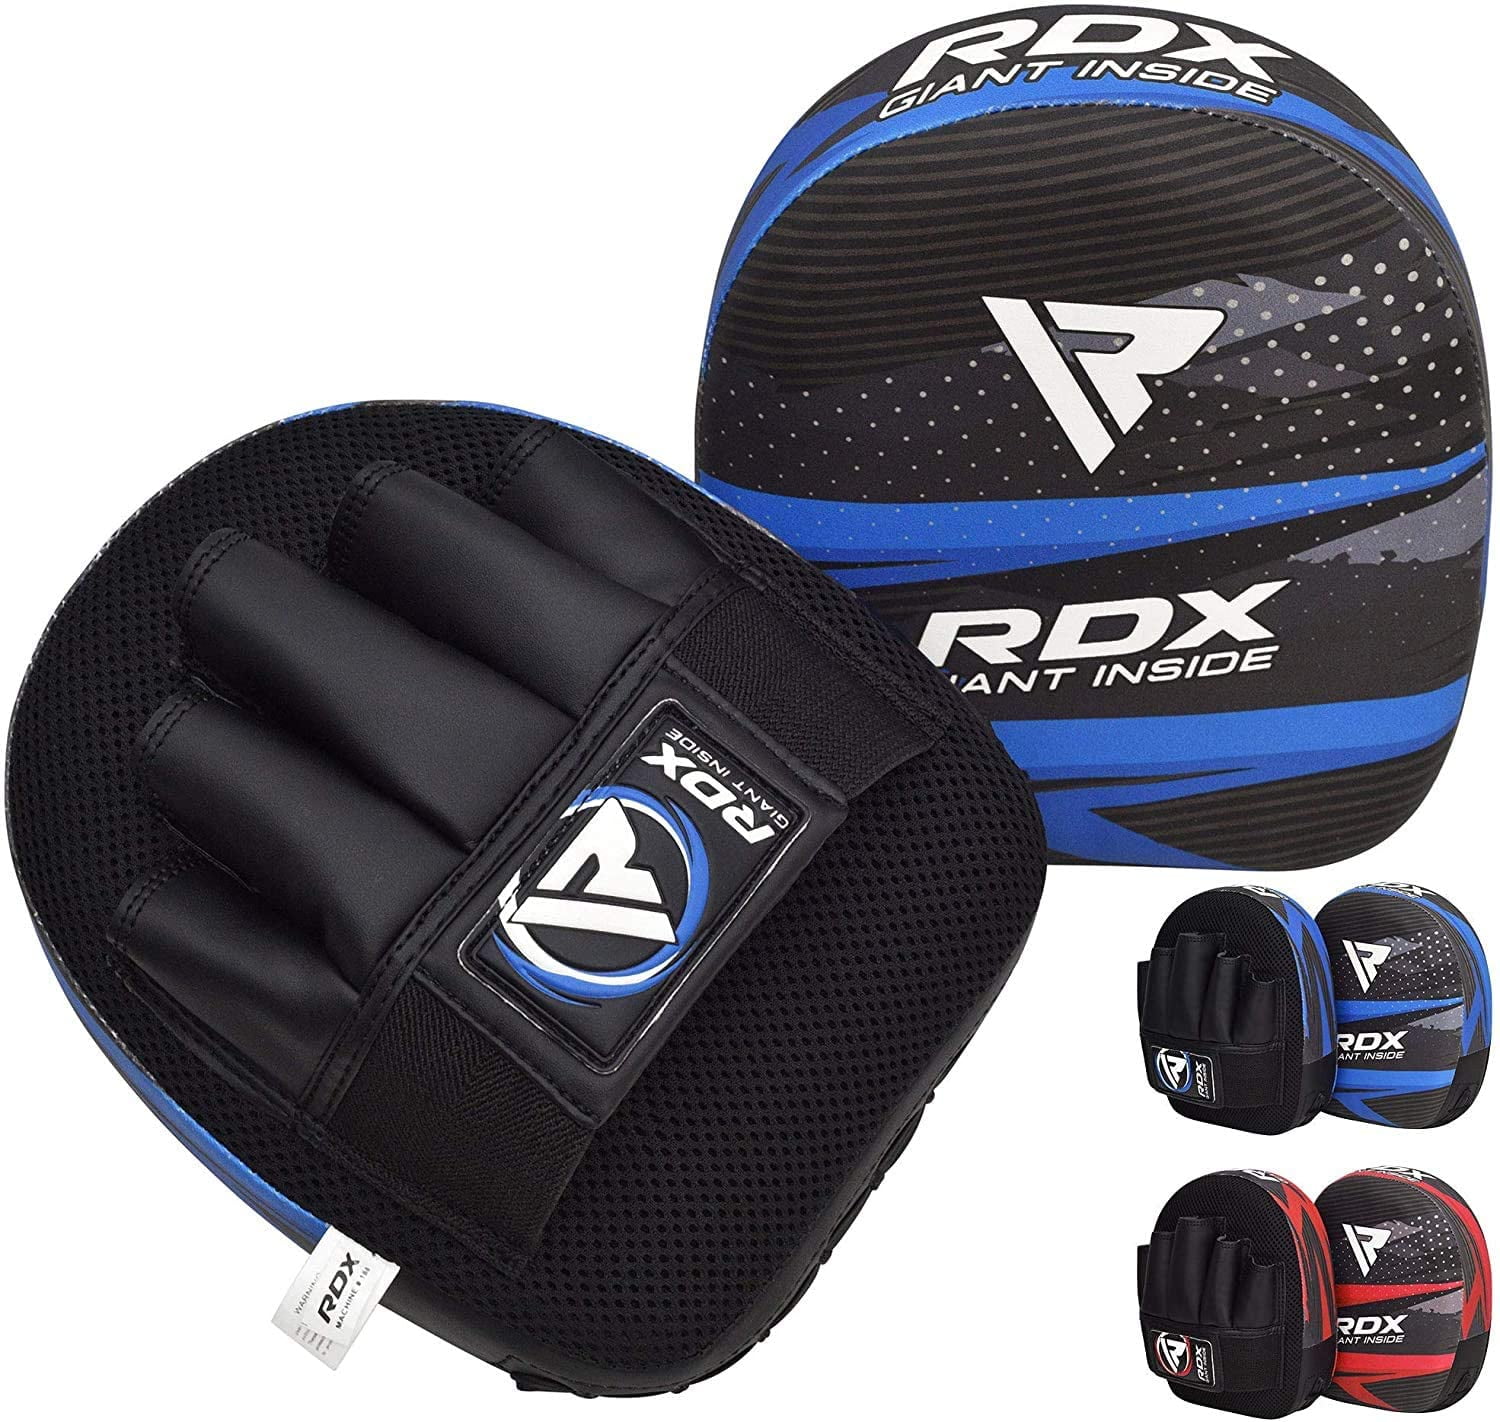 Details about   Kids Kick Shield Arm Pad Thai Boxing Strike Curved MMA Focus Muay Punch Mitt REX 